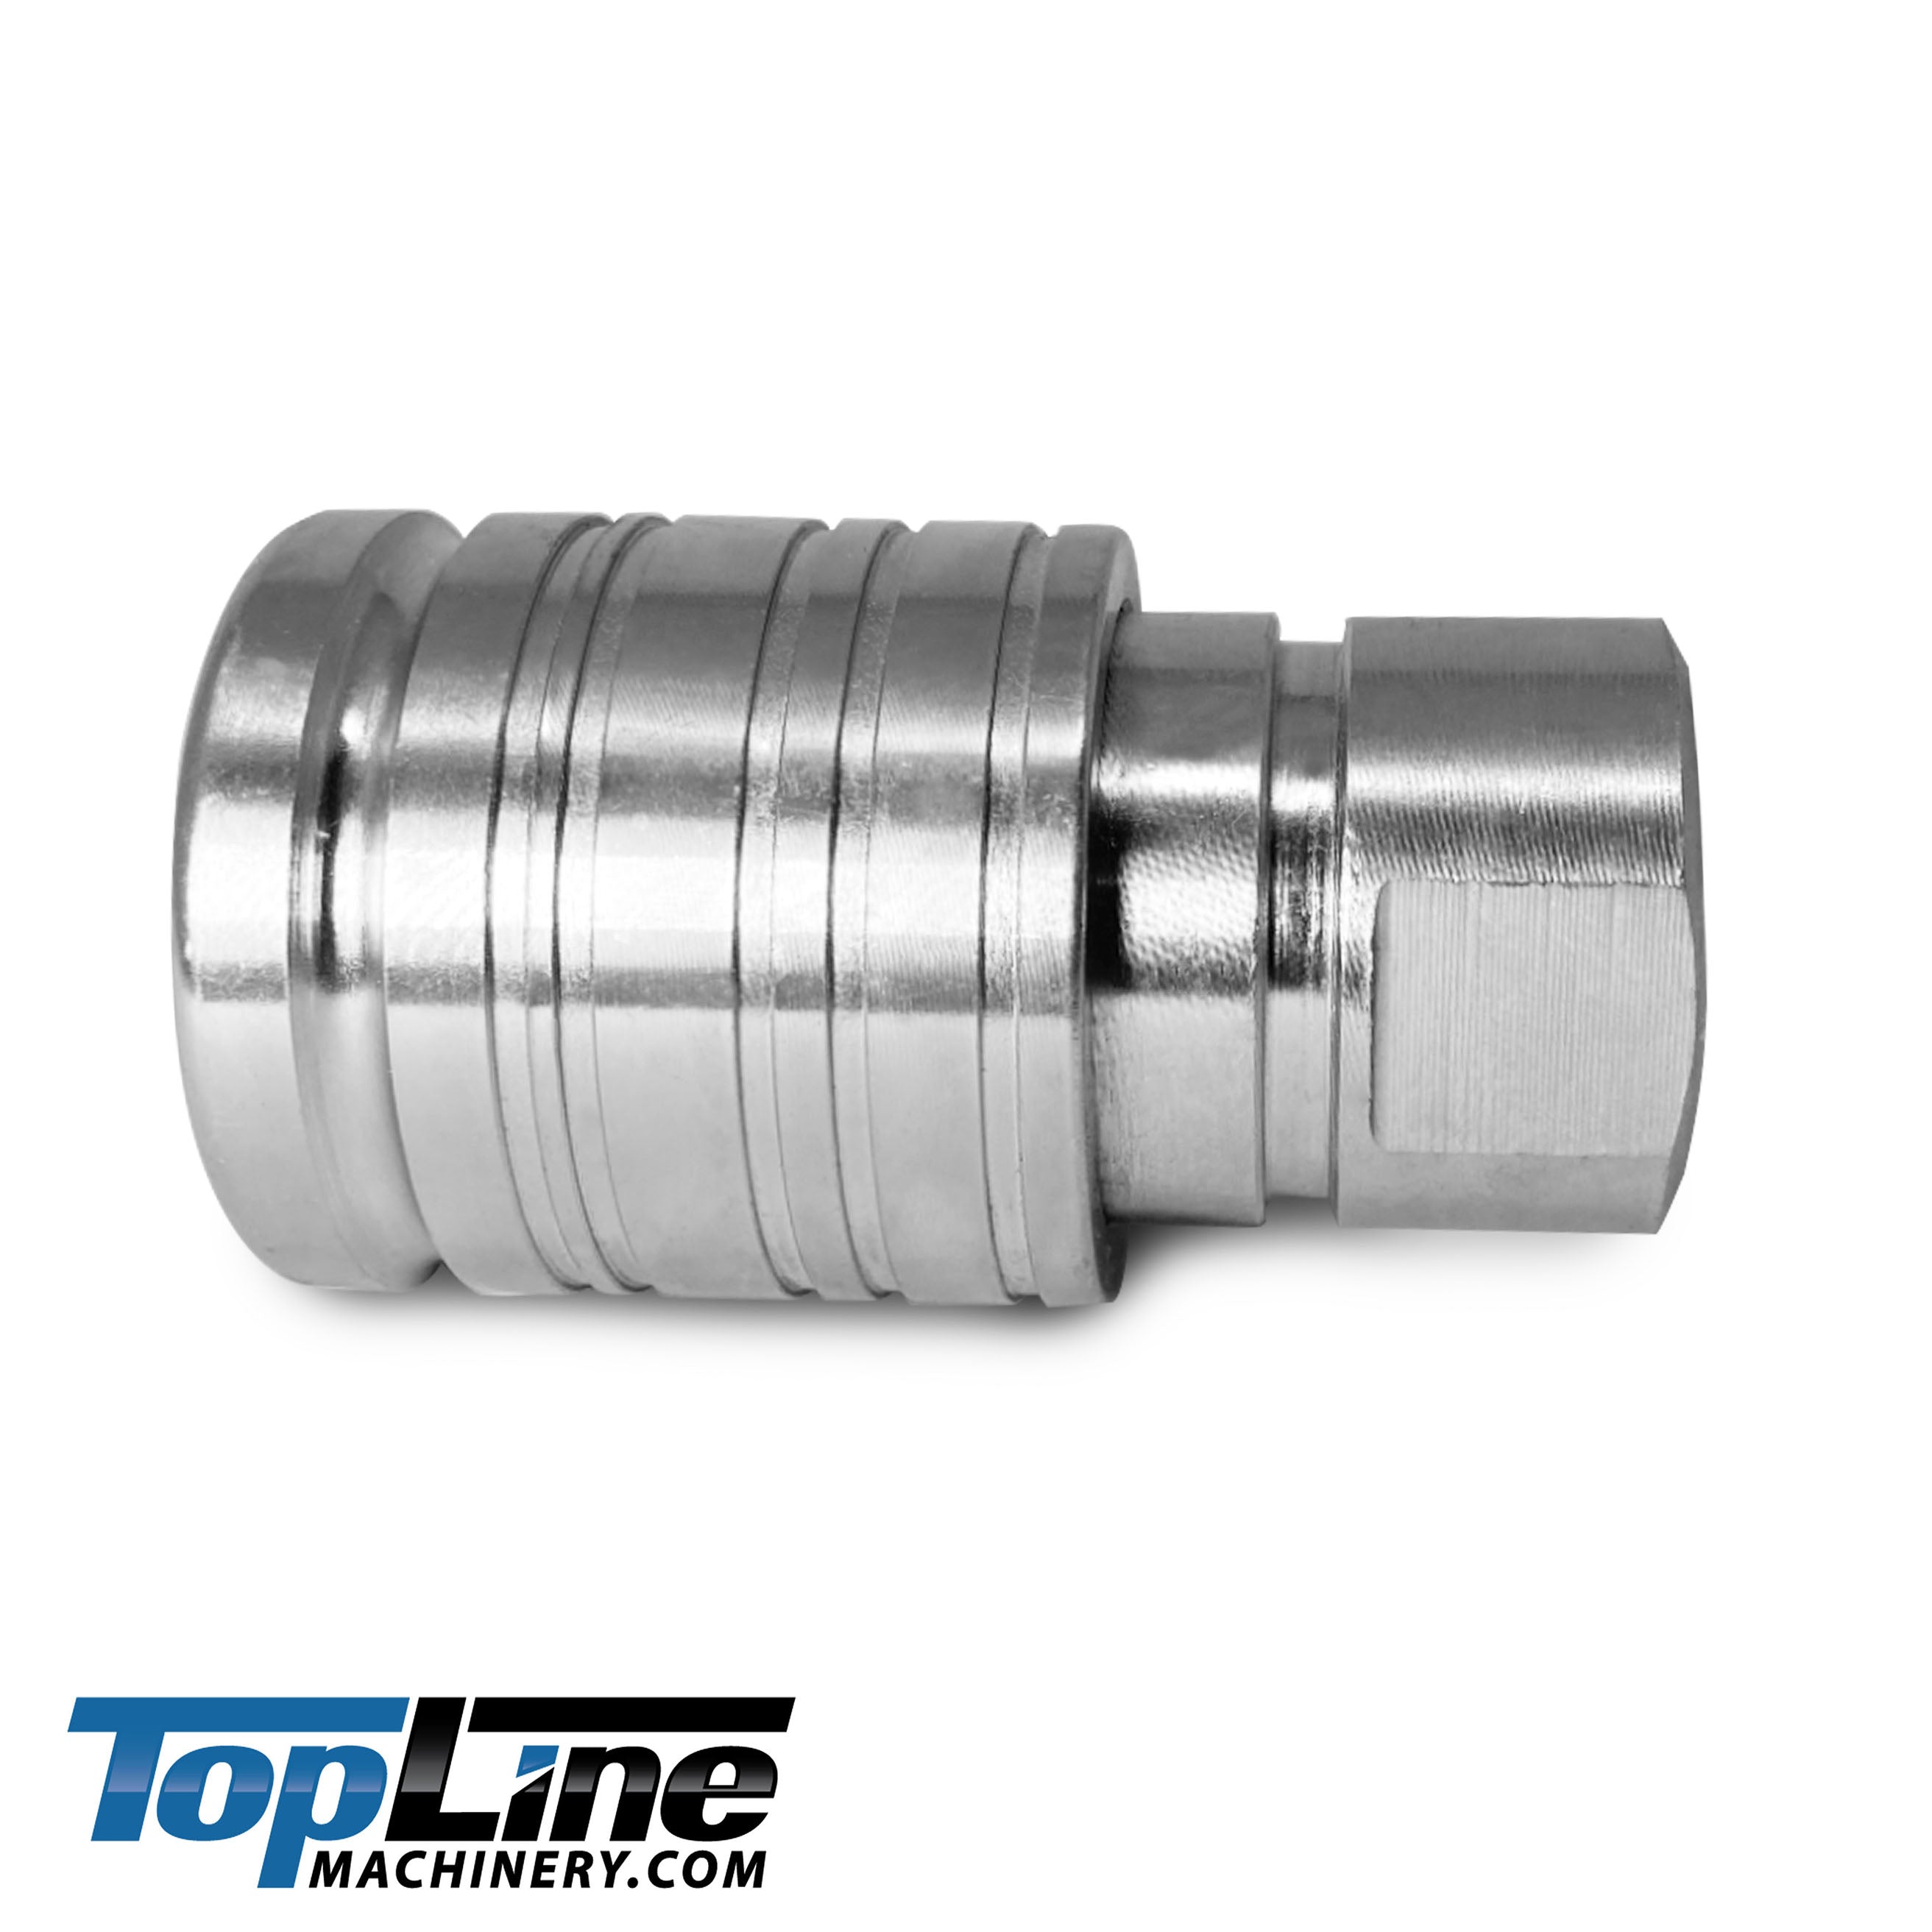 TL39-F 1/2 NPT Thread Female with 2 Snap Rings Ag Quick Connect